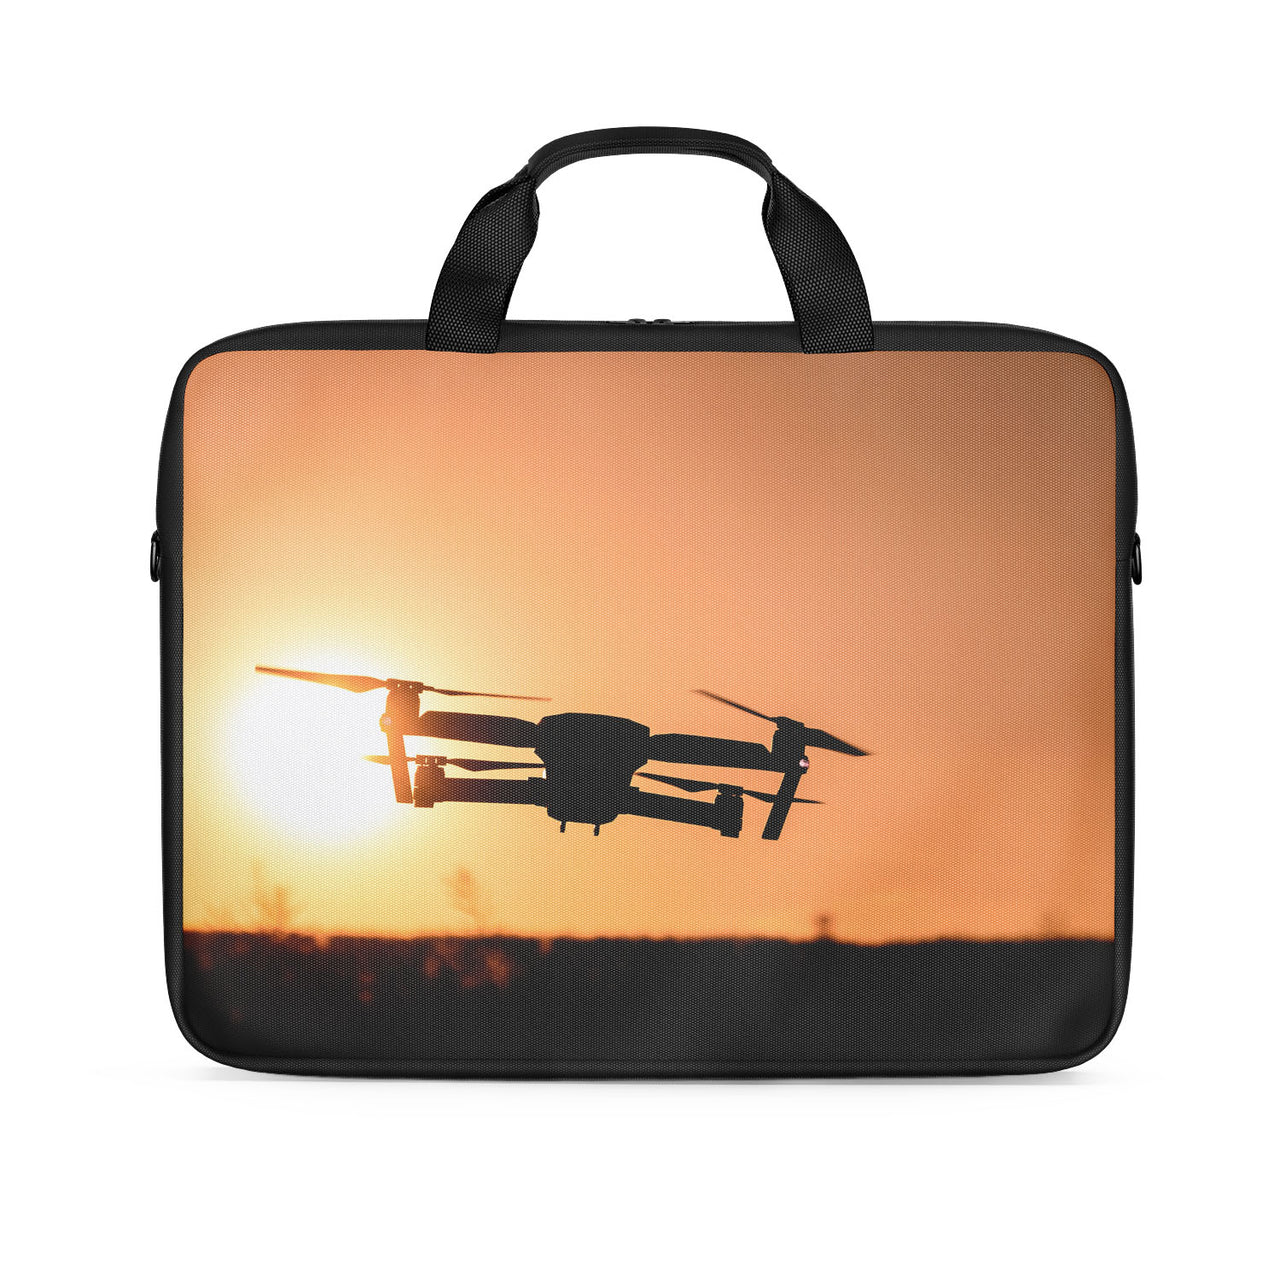 Amazing Drone in Sunset Designed Laptop & Tablet Bags